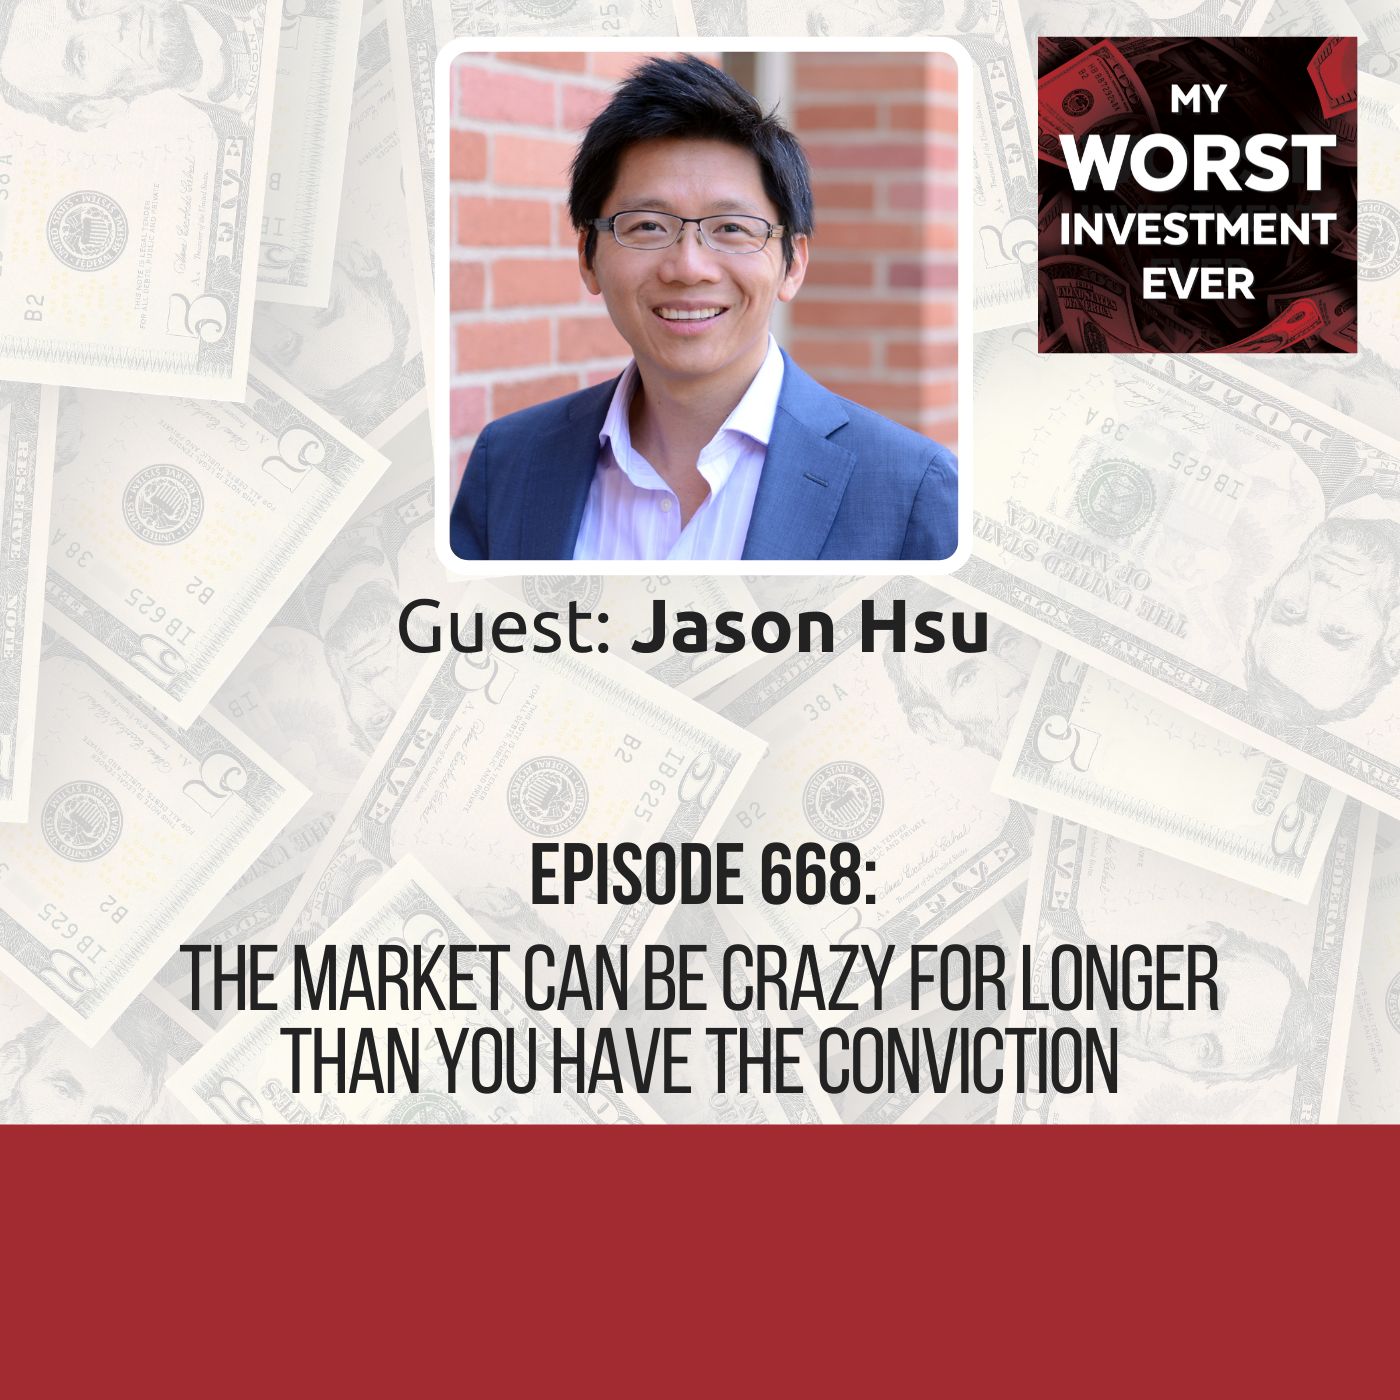 Jason Hsu – The Market Can Be Crazy for Longer than You Have the Conviction